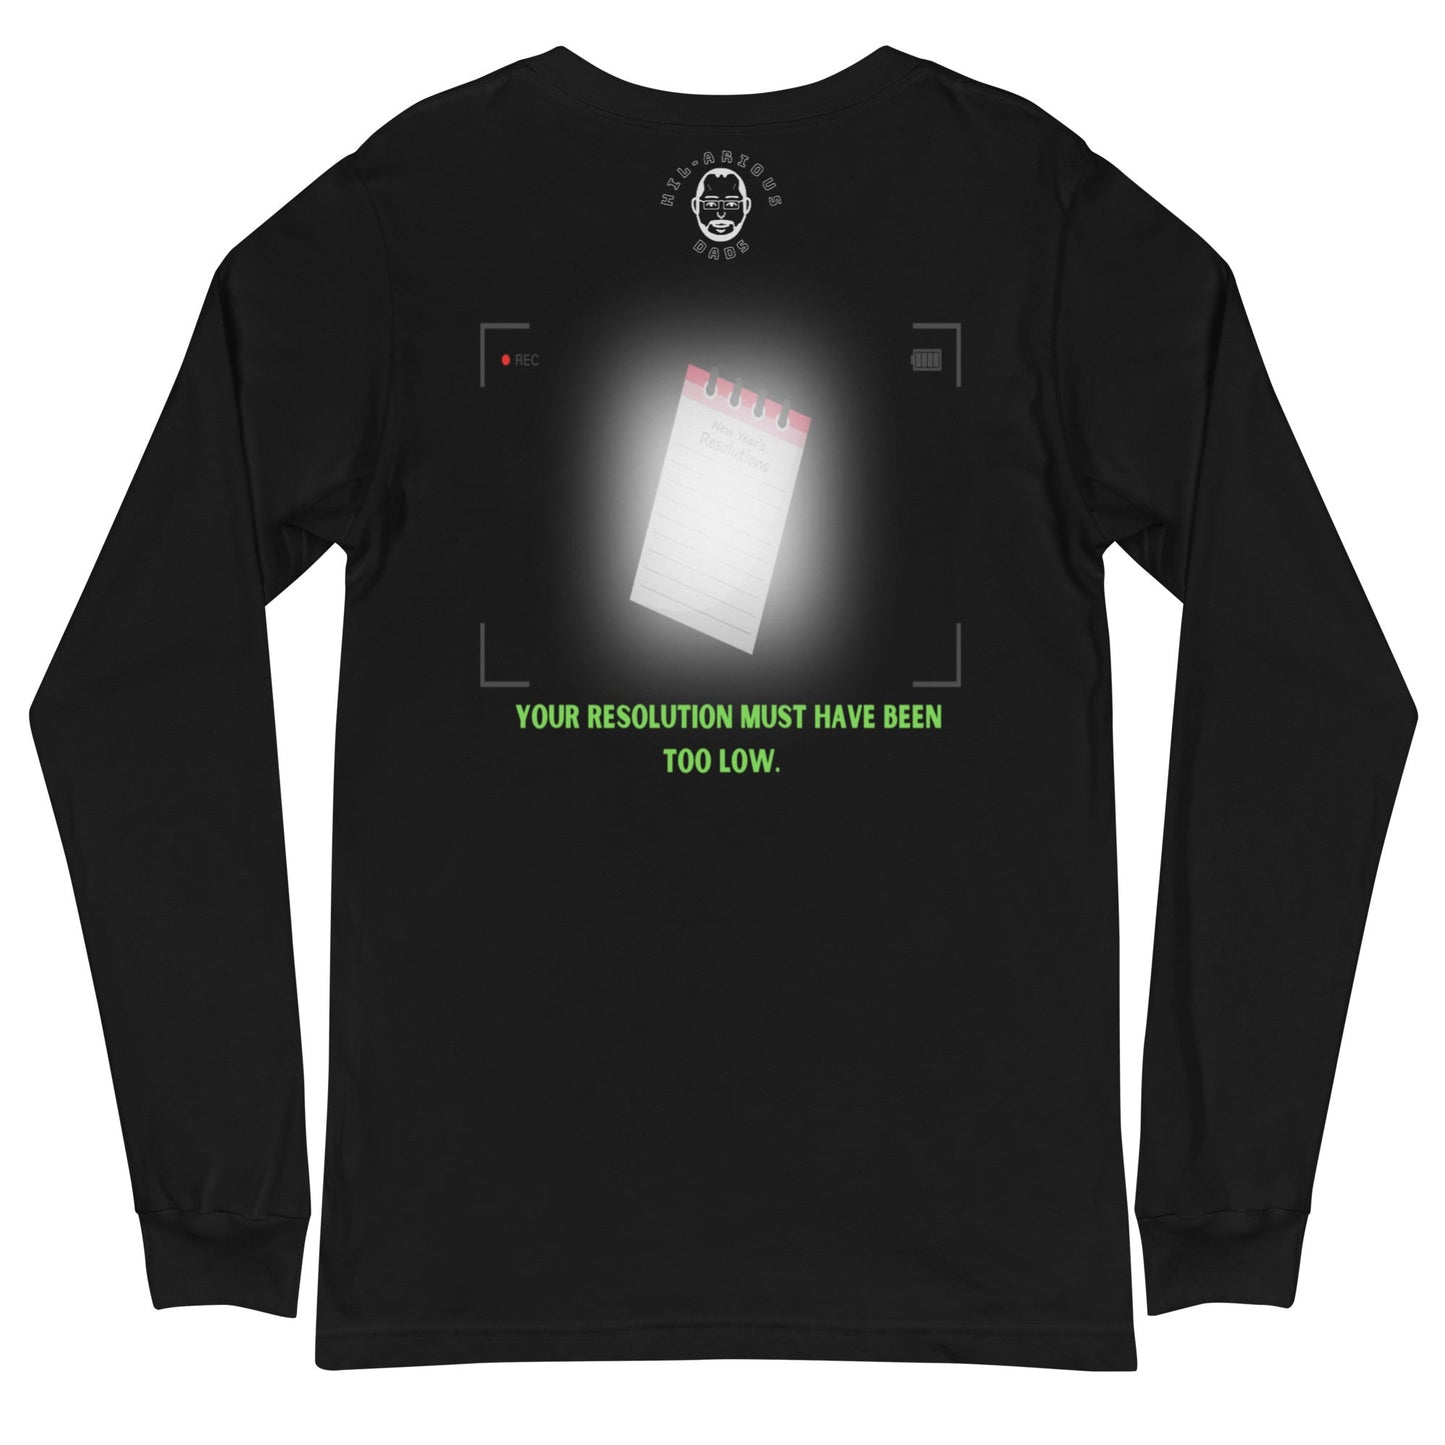 Why was 2022 such a blur?-Long Sleeve Tee - Hil-arious Dads